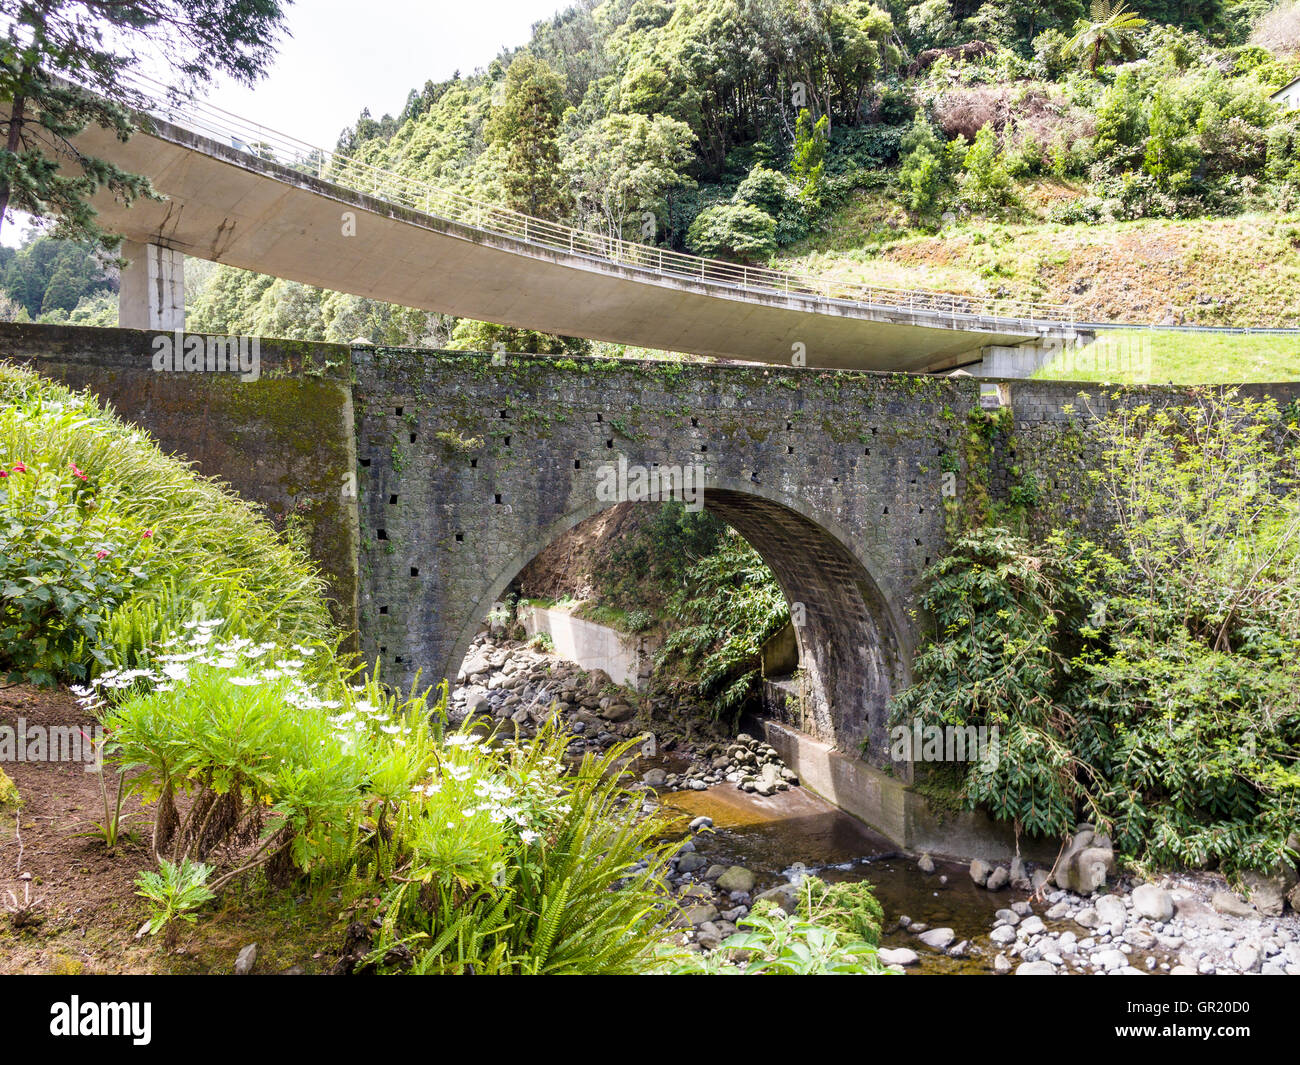 Old and New Bridges. An old stone arched bridge over a stream with a new highway fly-over bridge above. Stock Photo